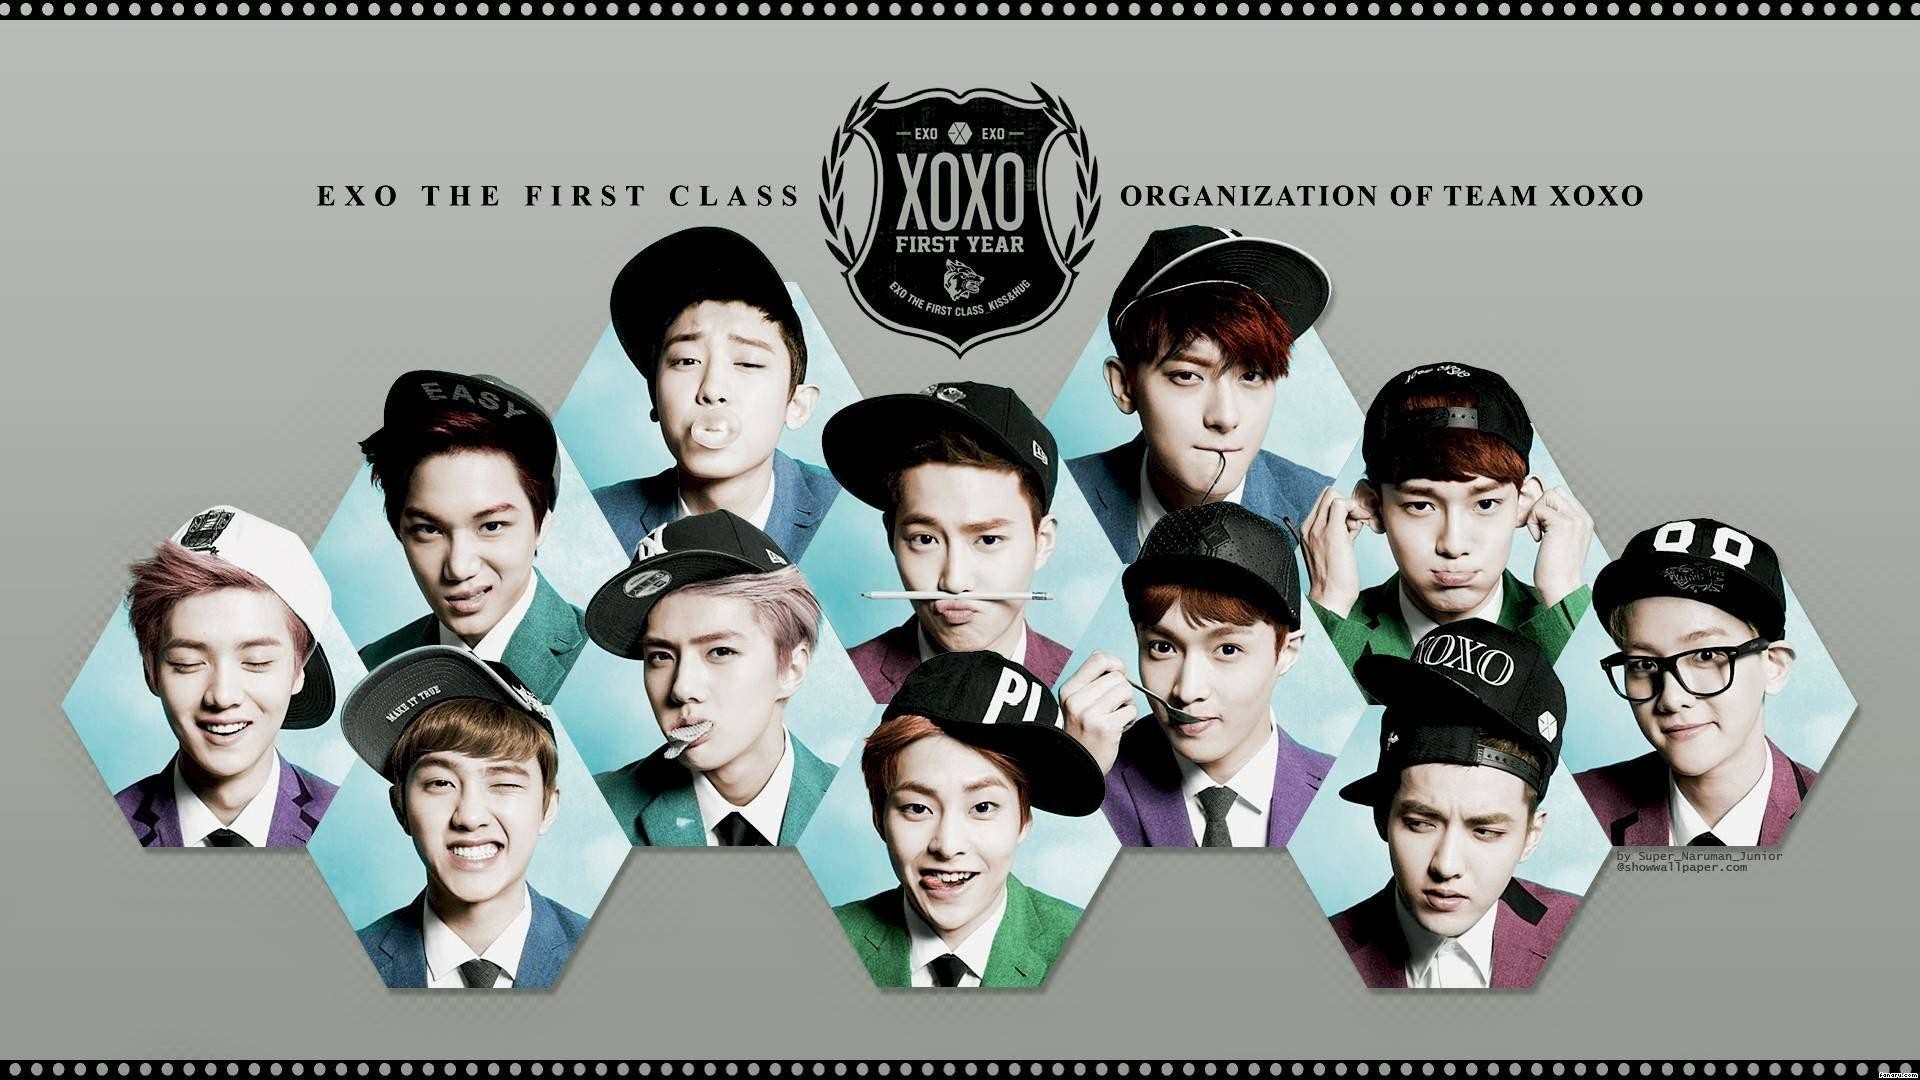 exo computer wallpaper,people,social group,team,youth,community